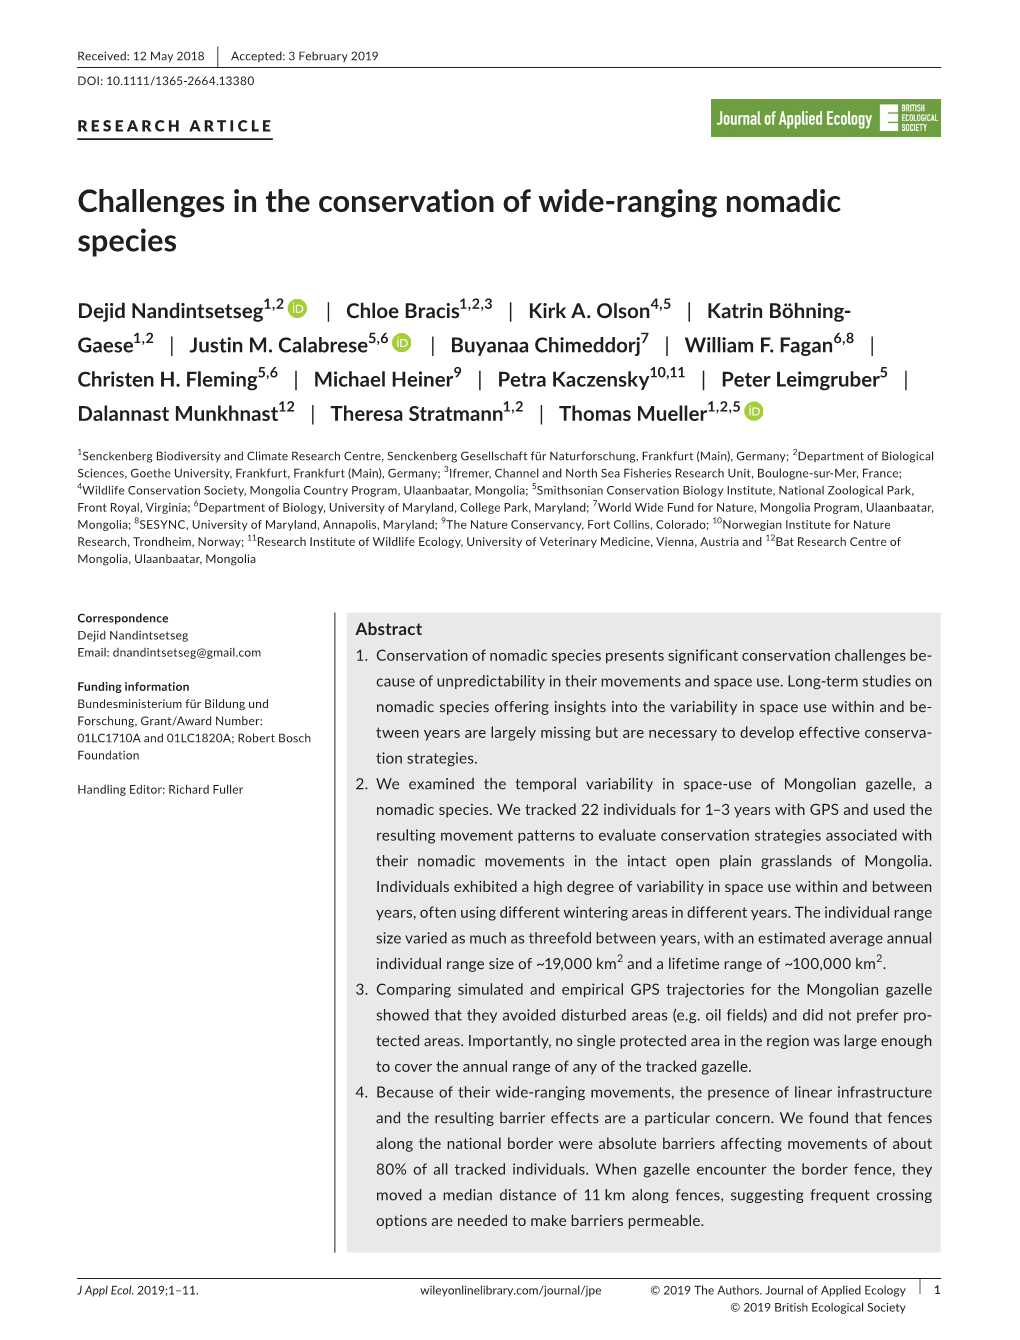 Challenges in the Conservation of Wide‐Ranging Nomadic Species